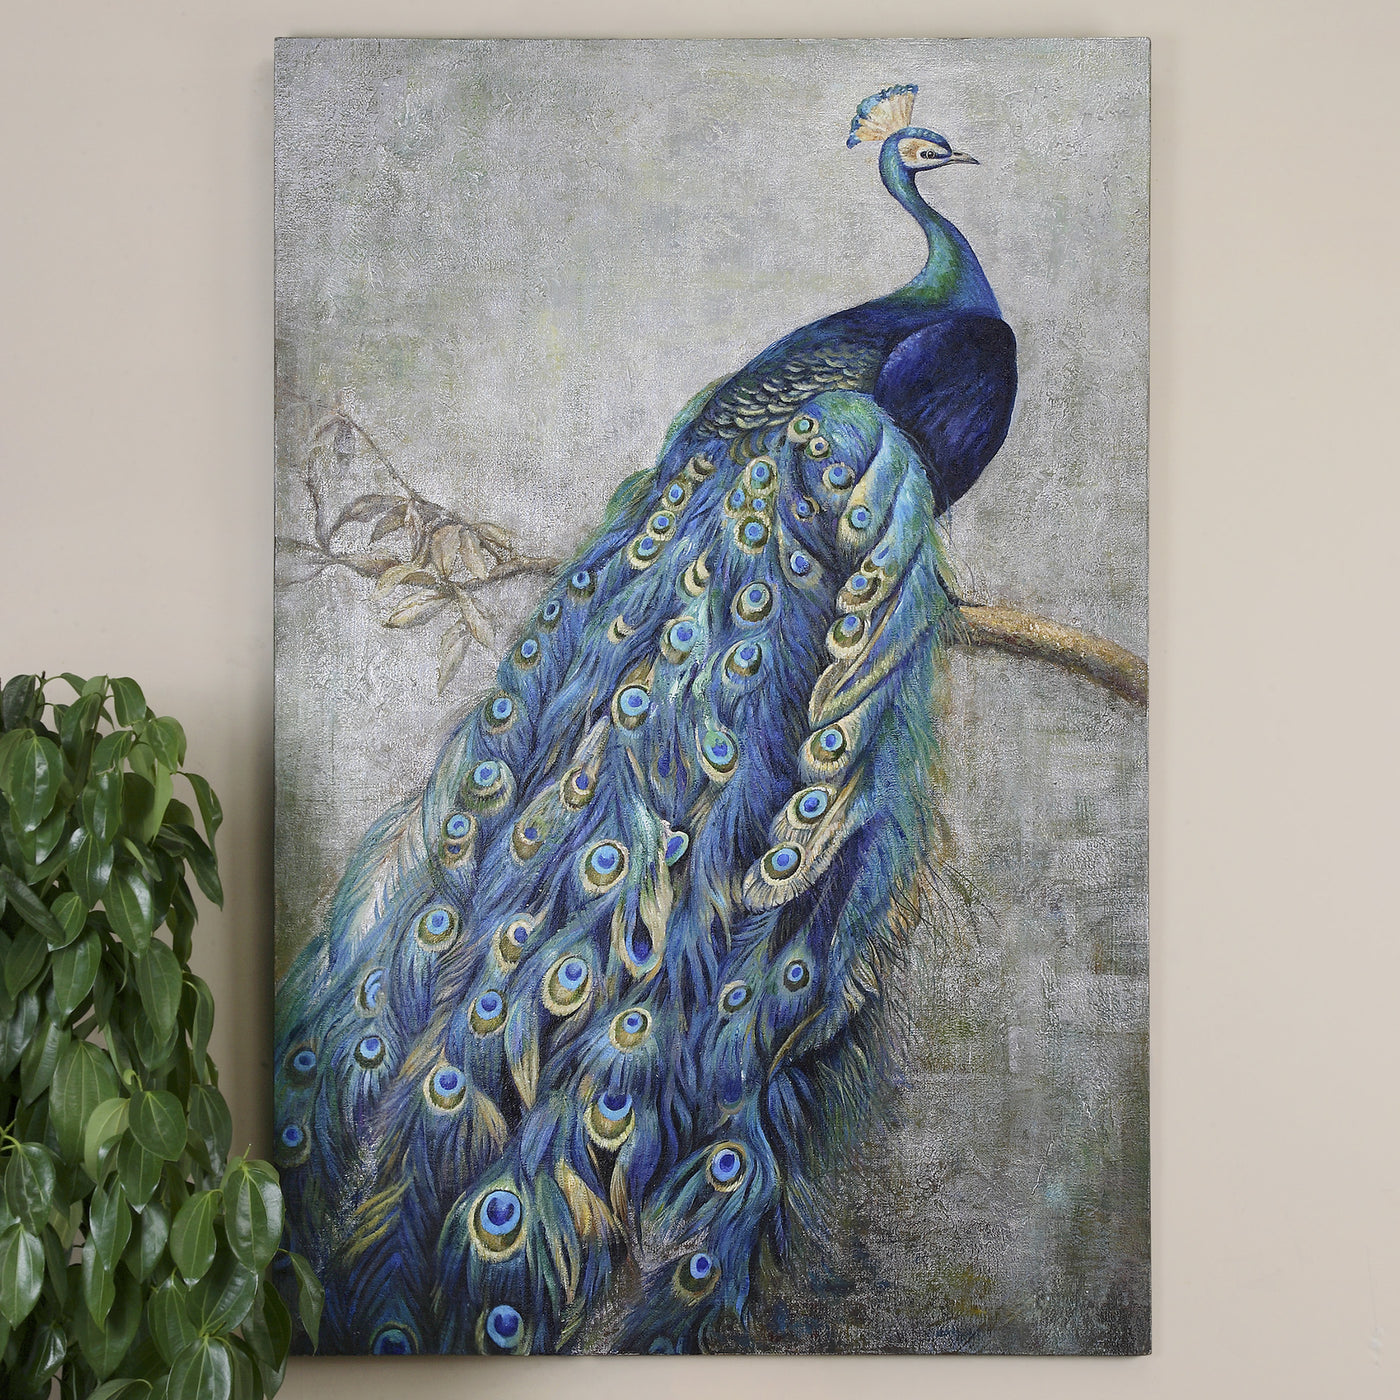 Refined Elegance Meets Eye-catching Vibrancy With This Hand Painted Peacock. Stunning Shades Of Turquoise, Green, And Yell...